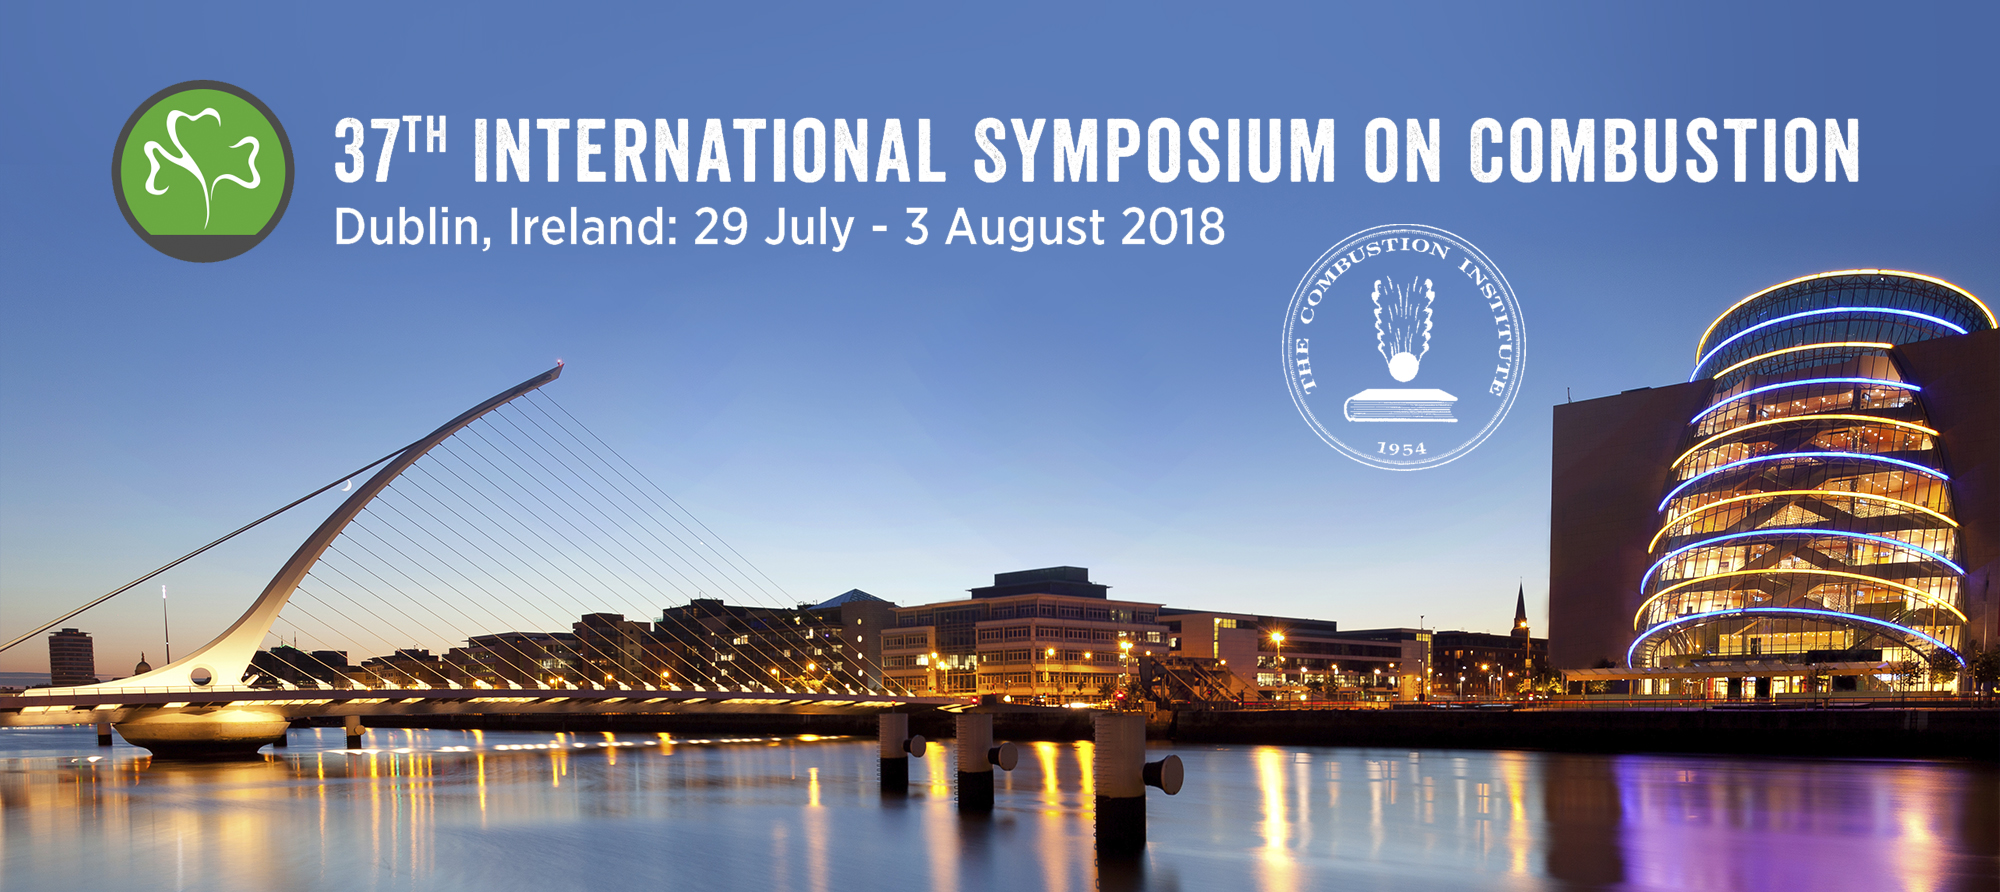 Call for Papers 37th International Symposium on Combustion The